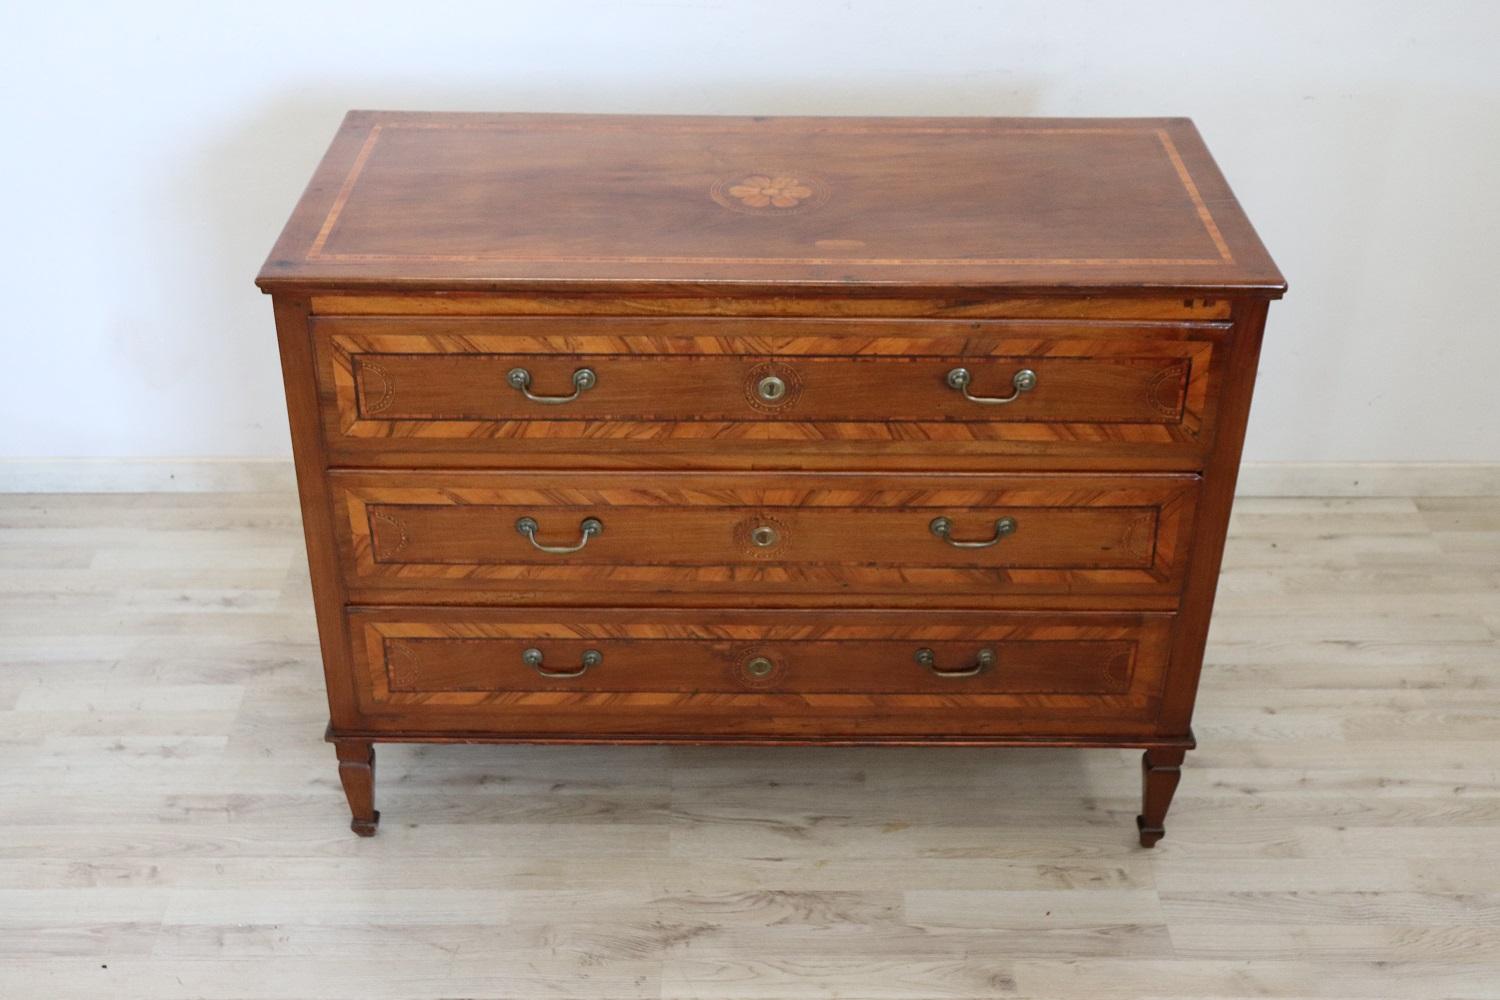 Important antique Italian Louis XVI chest of drawers 1780s walnut wood. Inlaid decoration of geometric taste. On the front three large and useful drawers. In the 17th century only important families could afford to have furniture of this value. This